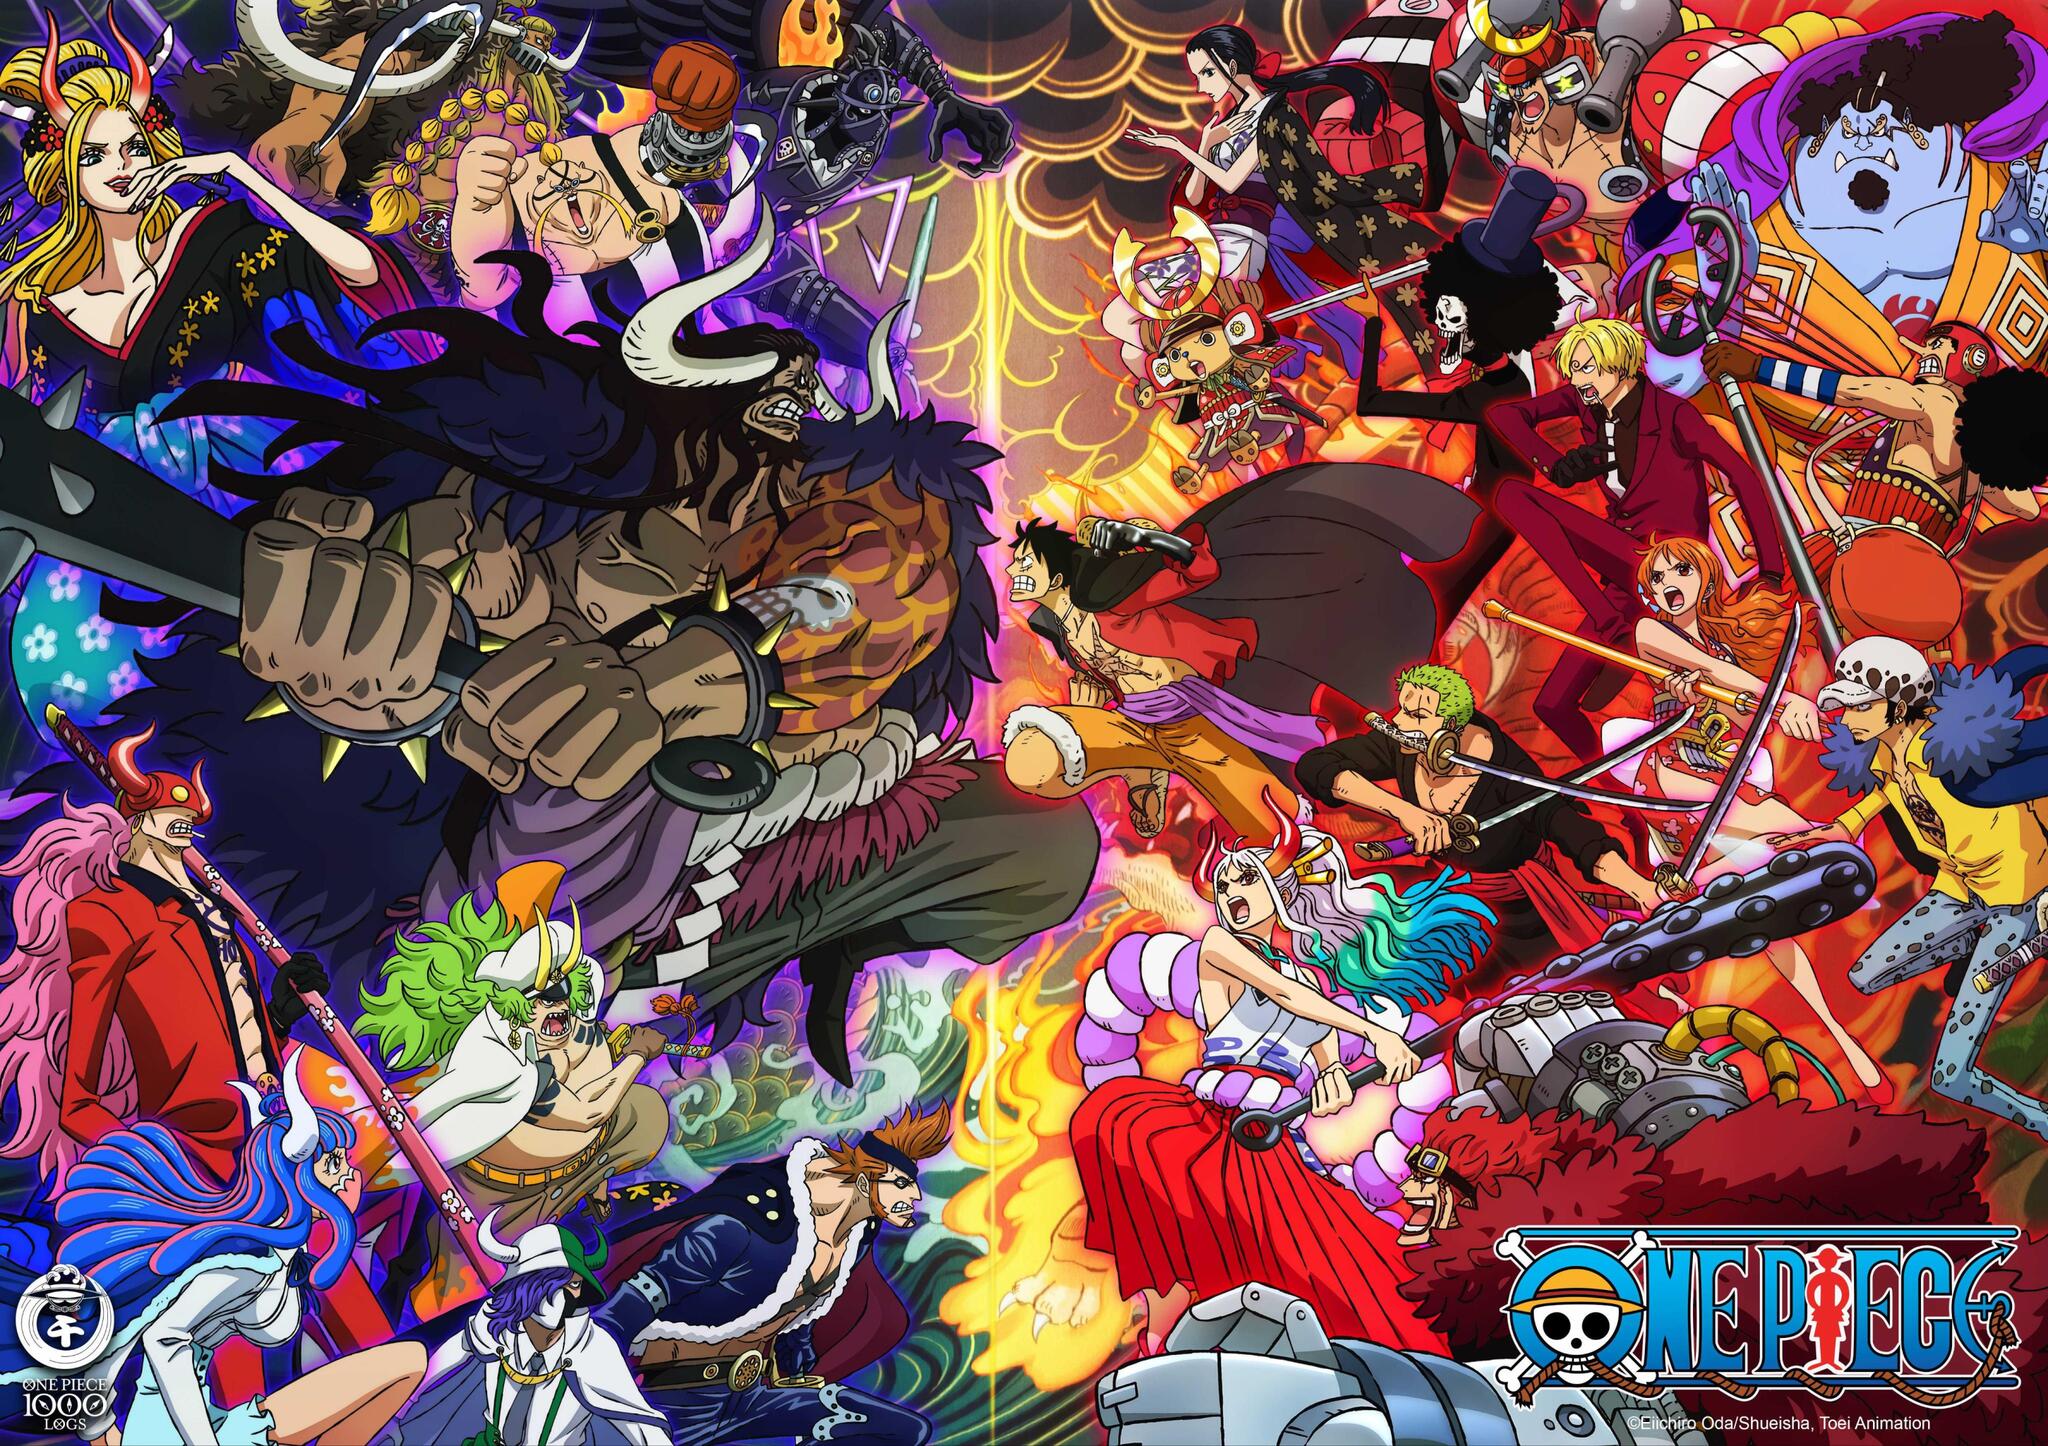 One Piece Episodes: 'One Piece': How many episodes are available